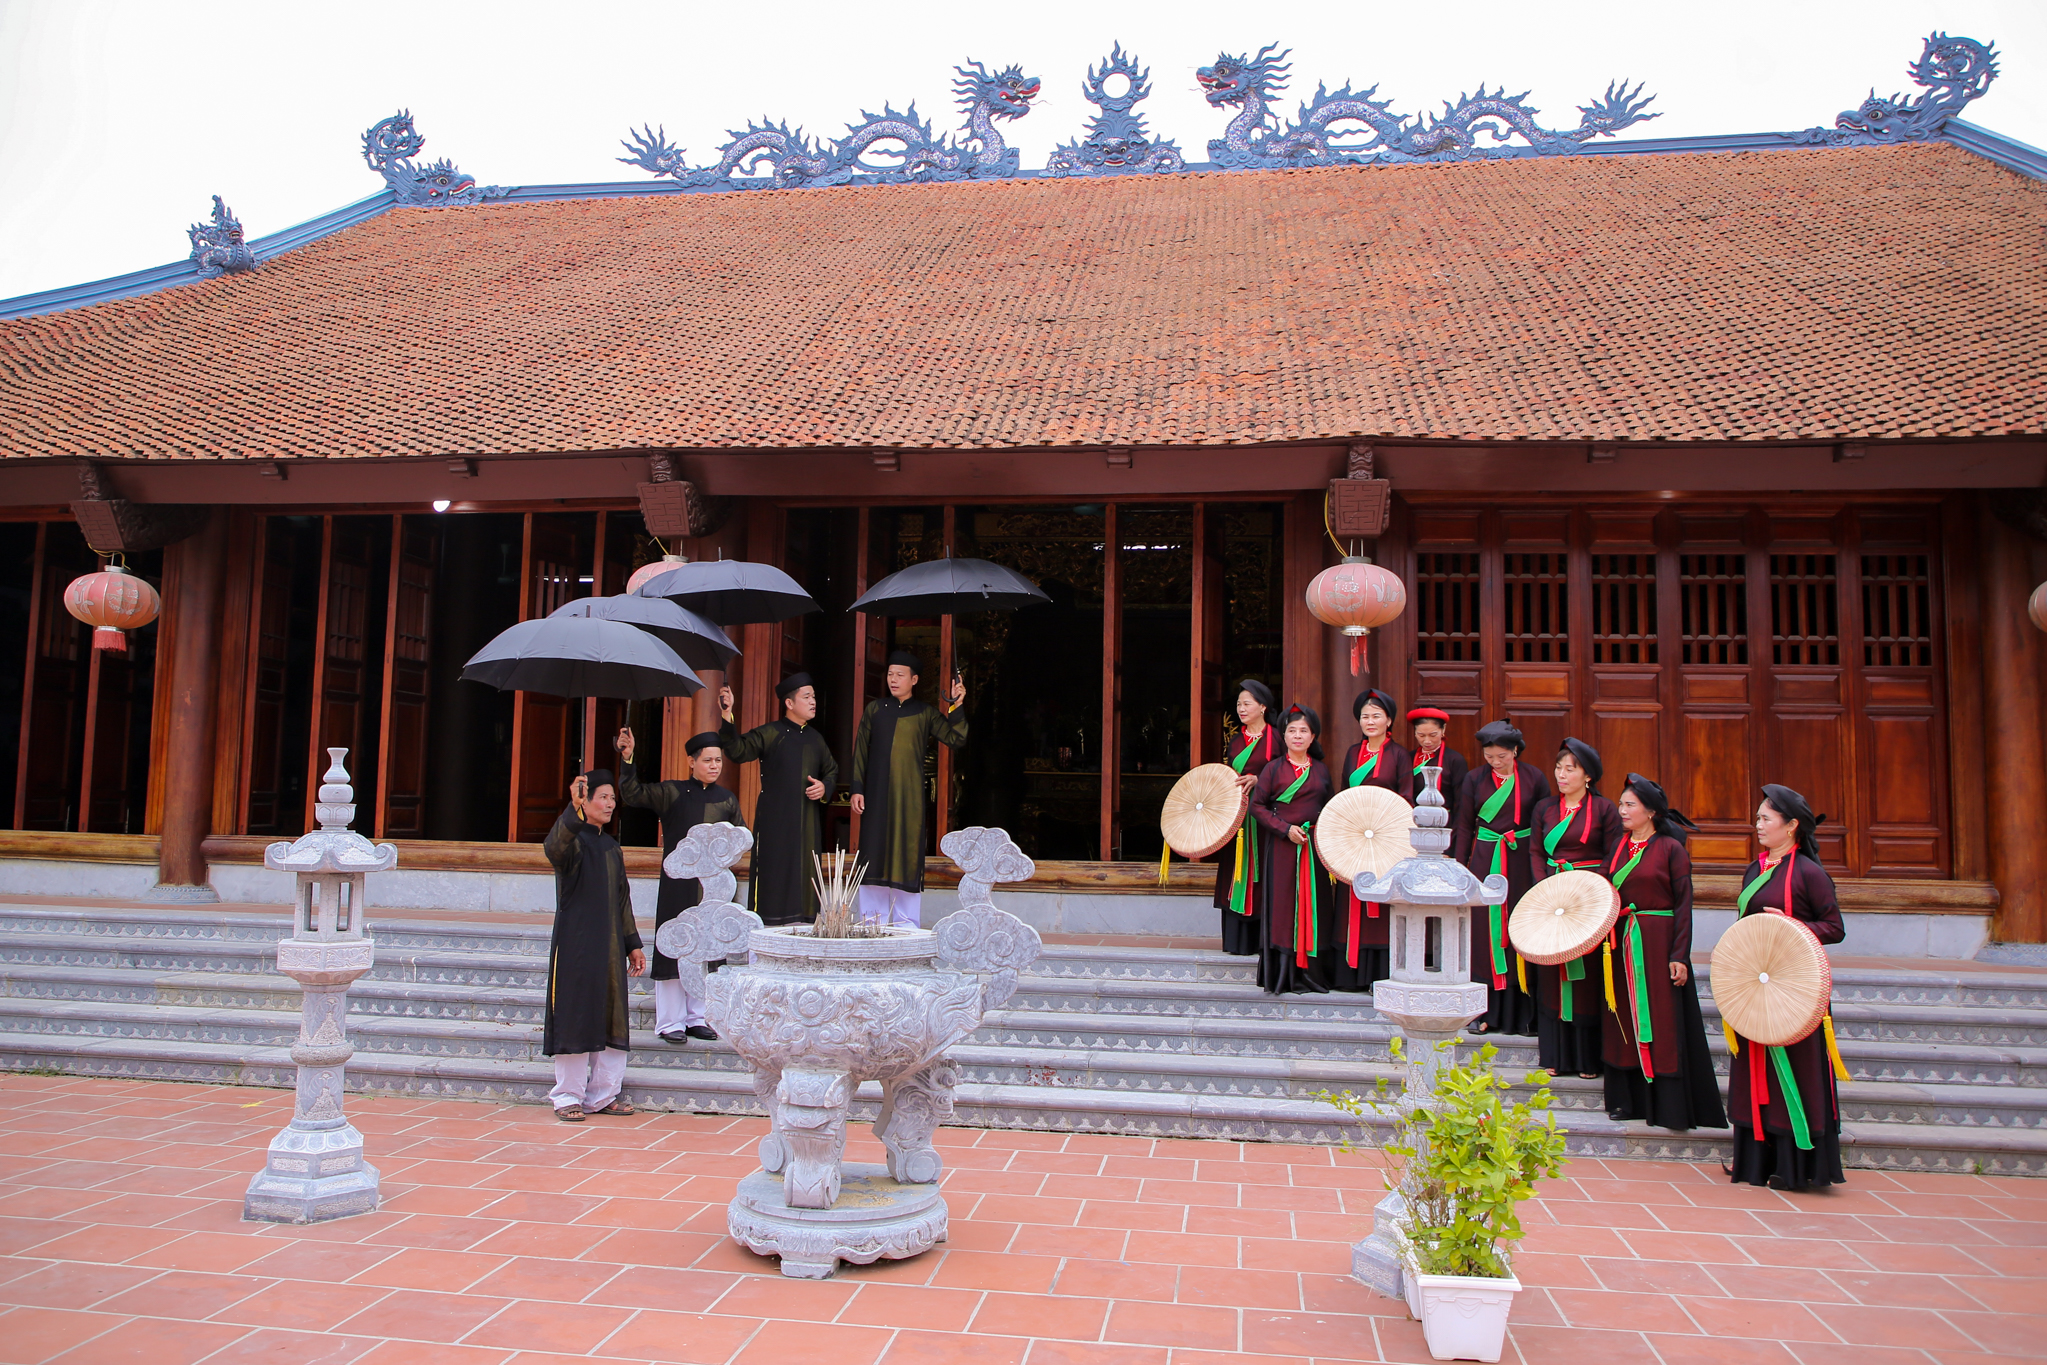 The communal house’s yard is a weekly dating place for male and female singers in the Noi Ninh ancient quan ho village.